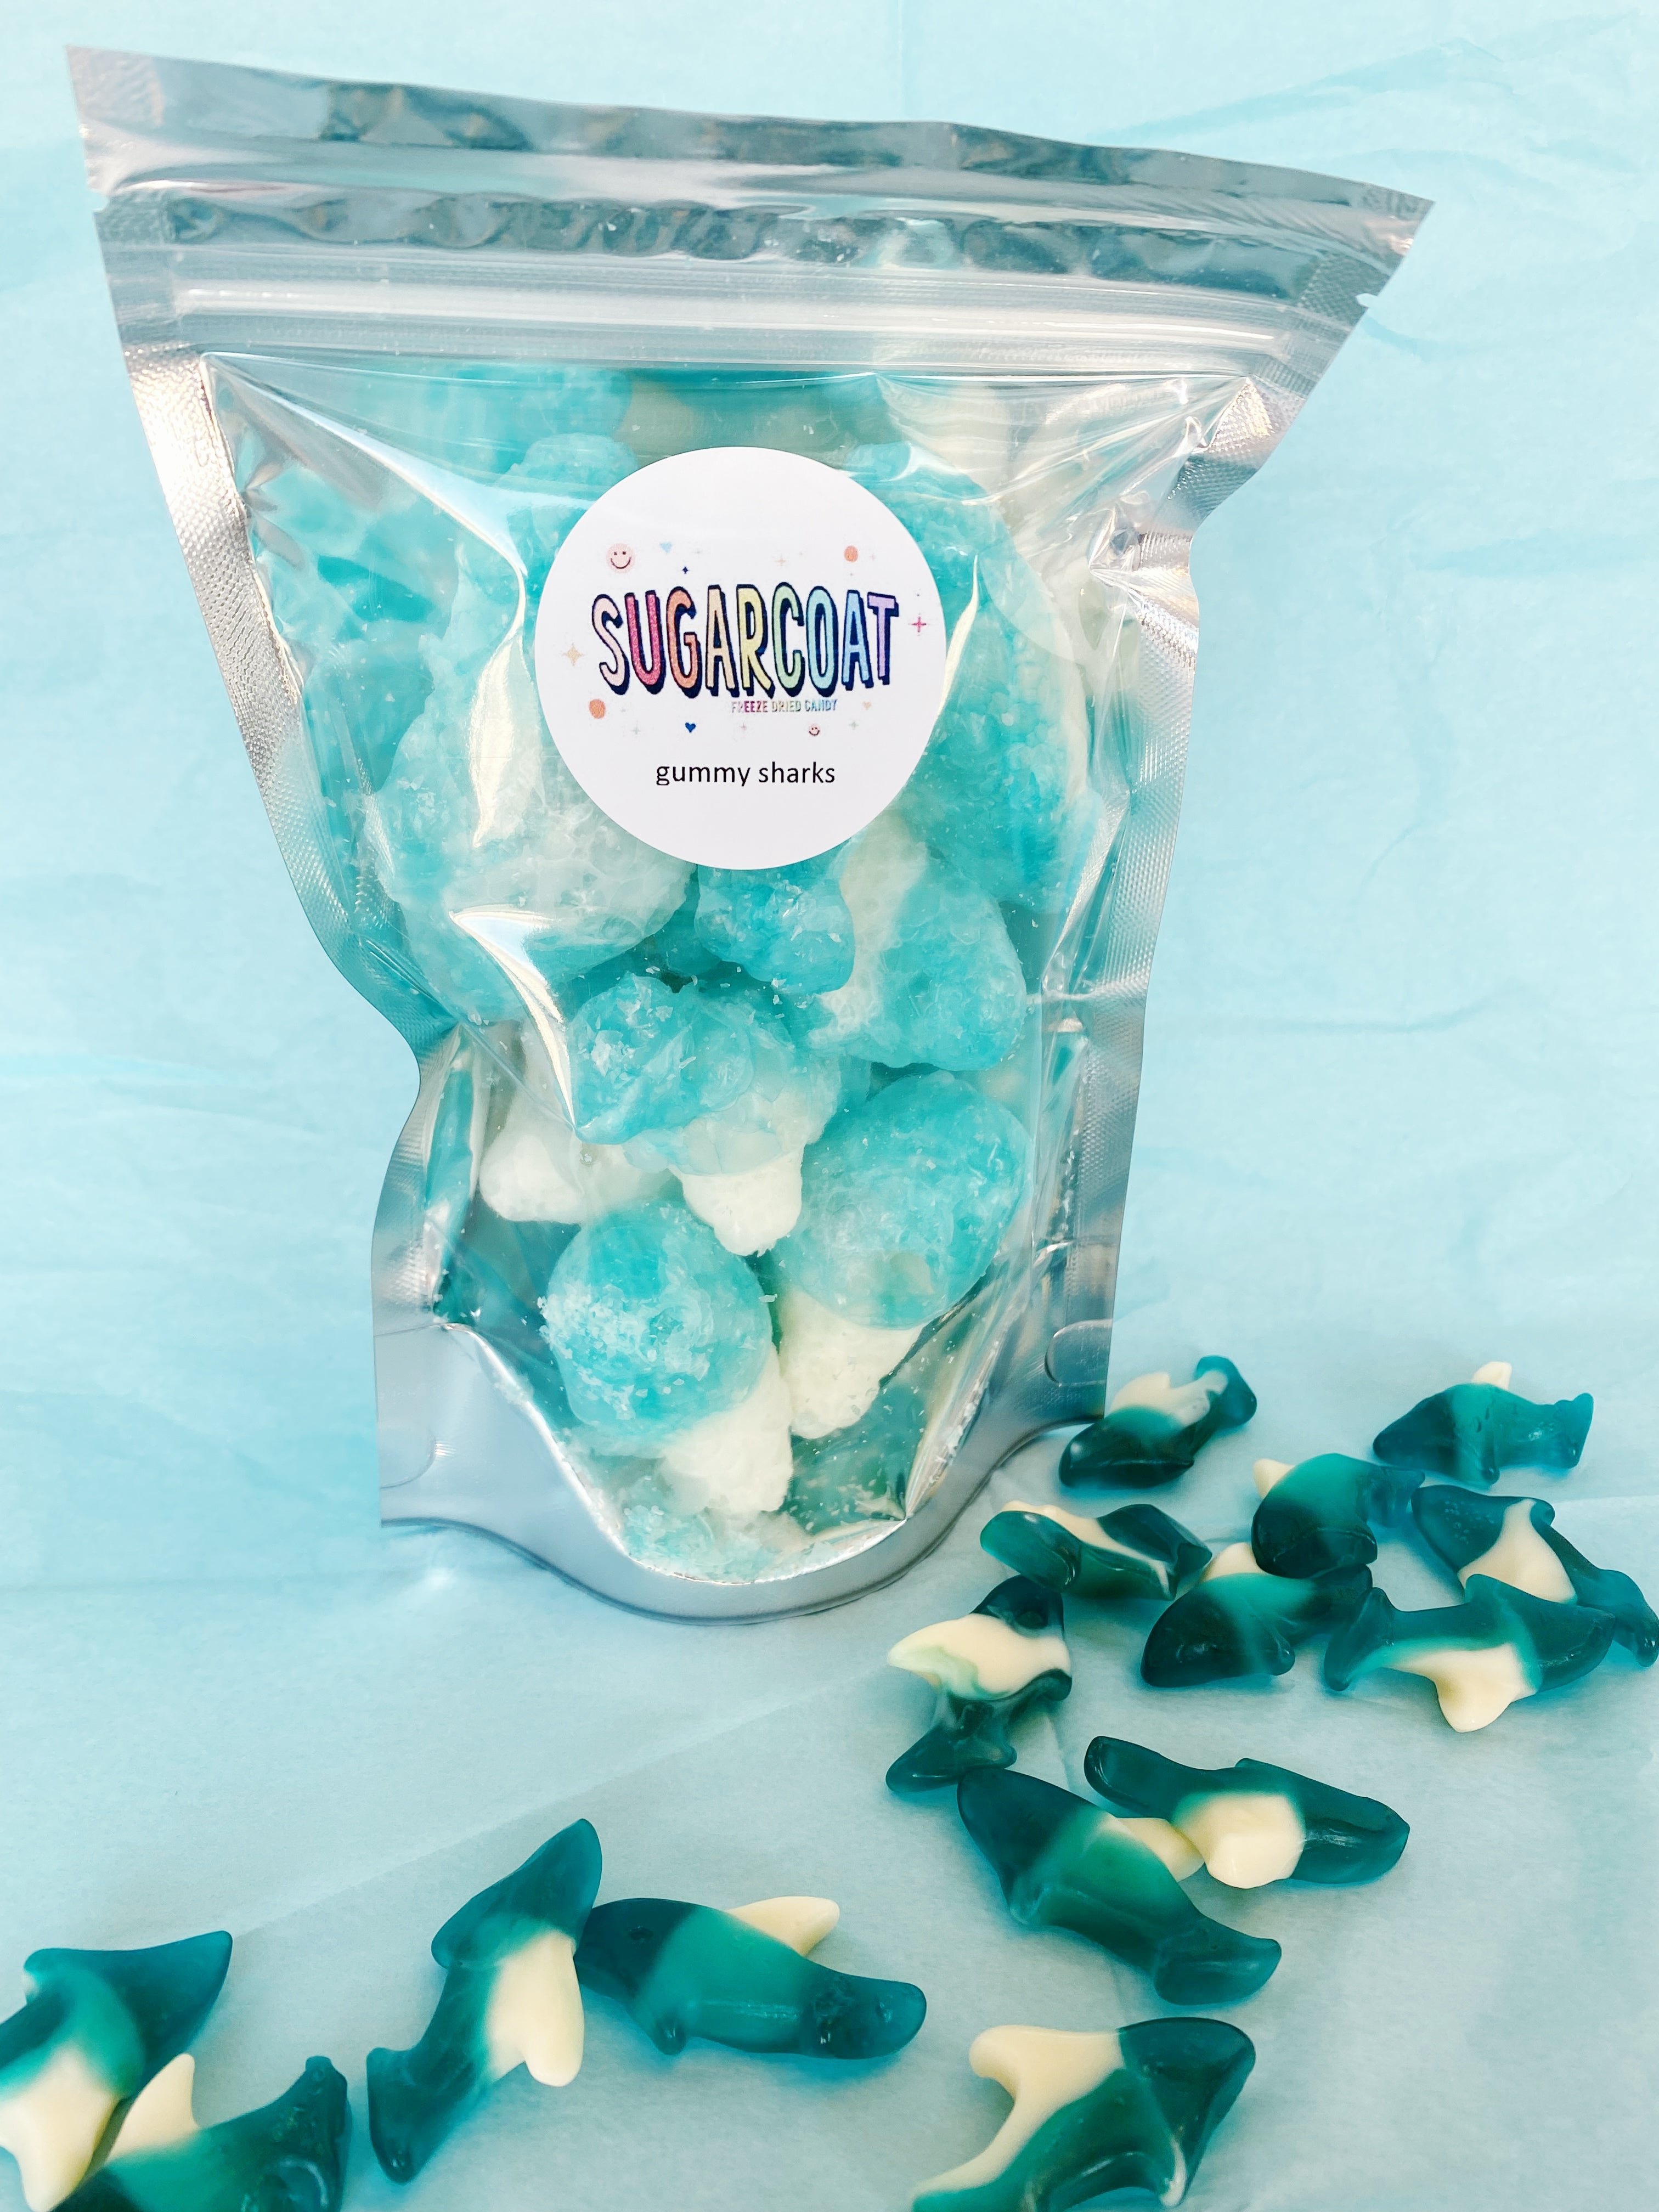  Freeze Dried Gummy Sharks - Premium Freeze Dried Candy Shipped  in a Box for Extra Protection - Space Age Snacks Space Sharks Freeze Dry  Candy for All Ages Dry Freeze Candy (